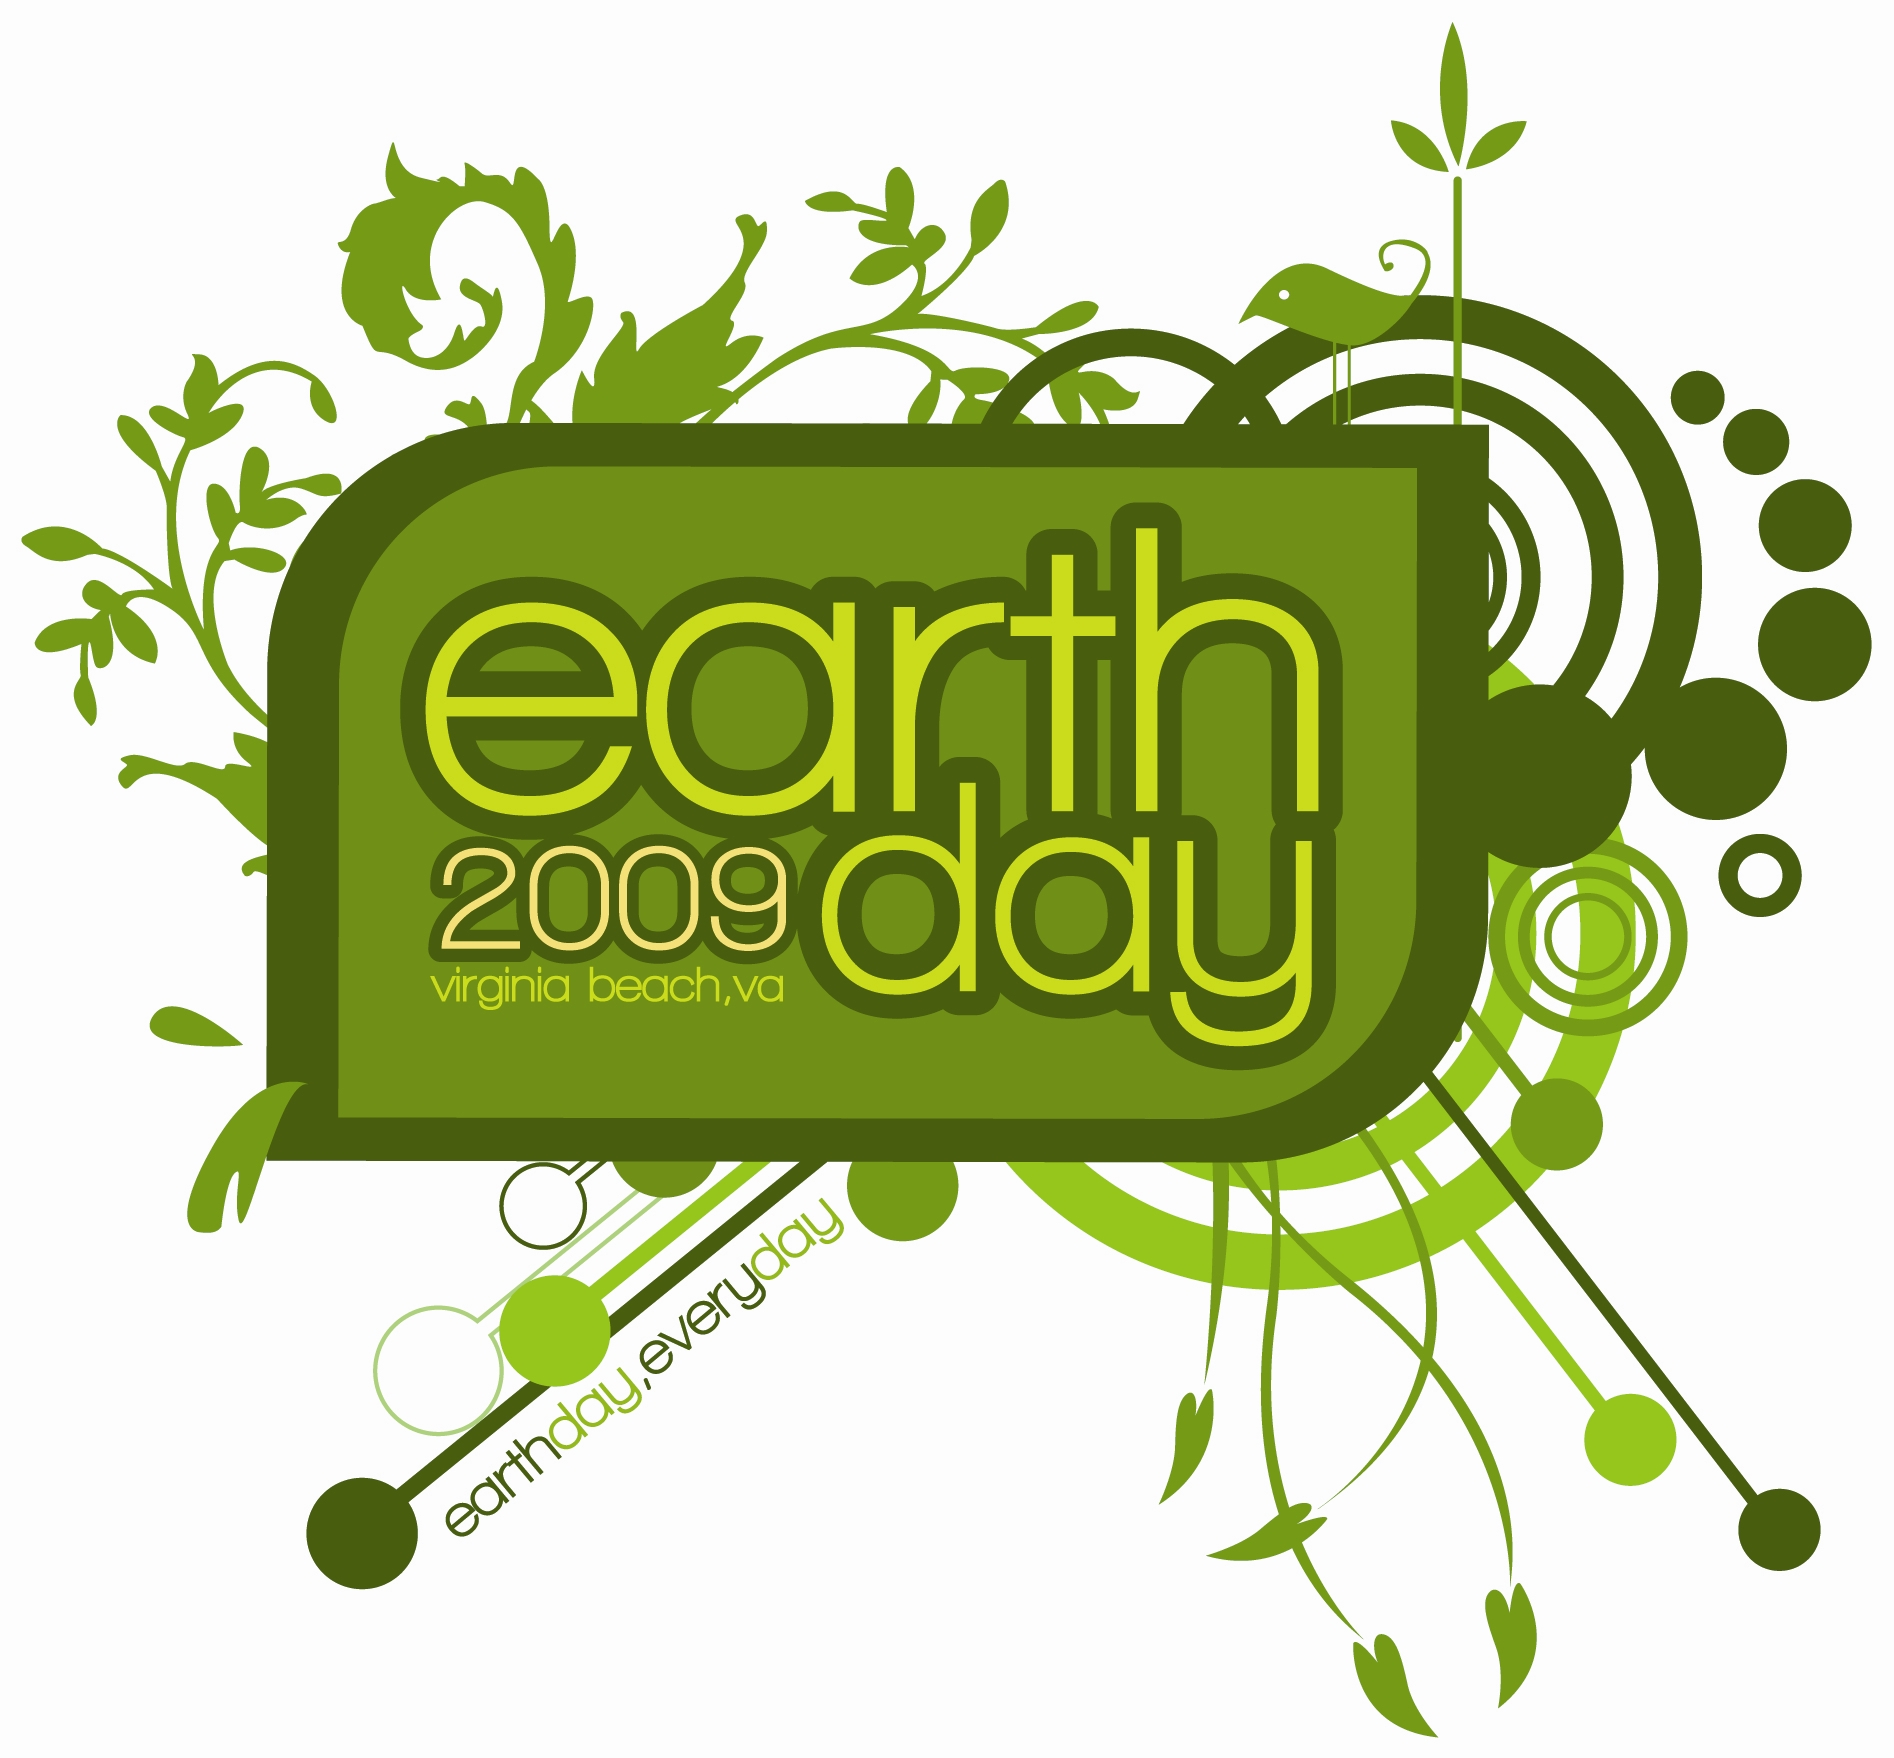 earth day activities for kids